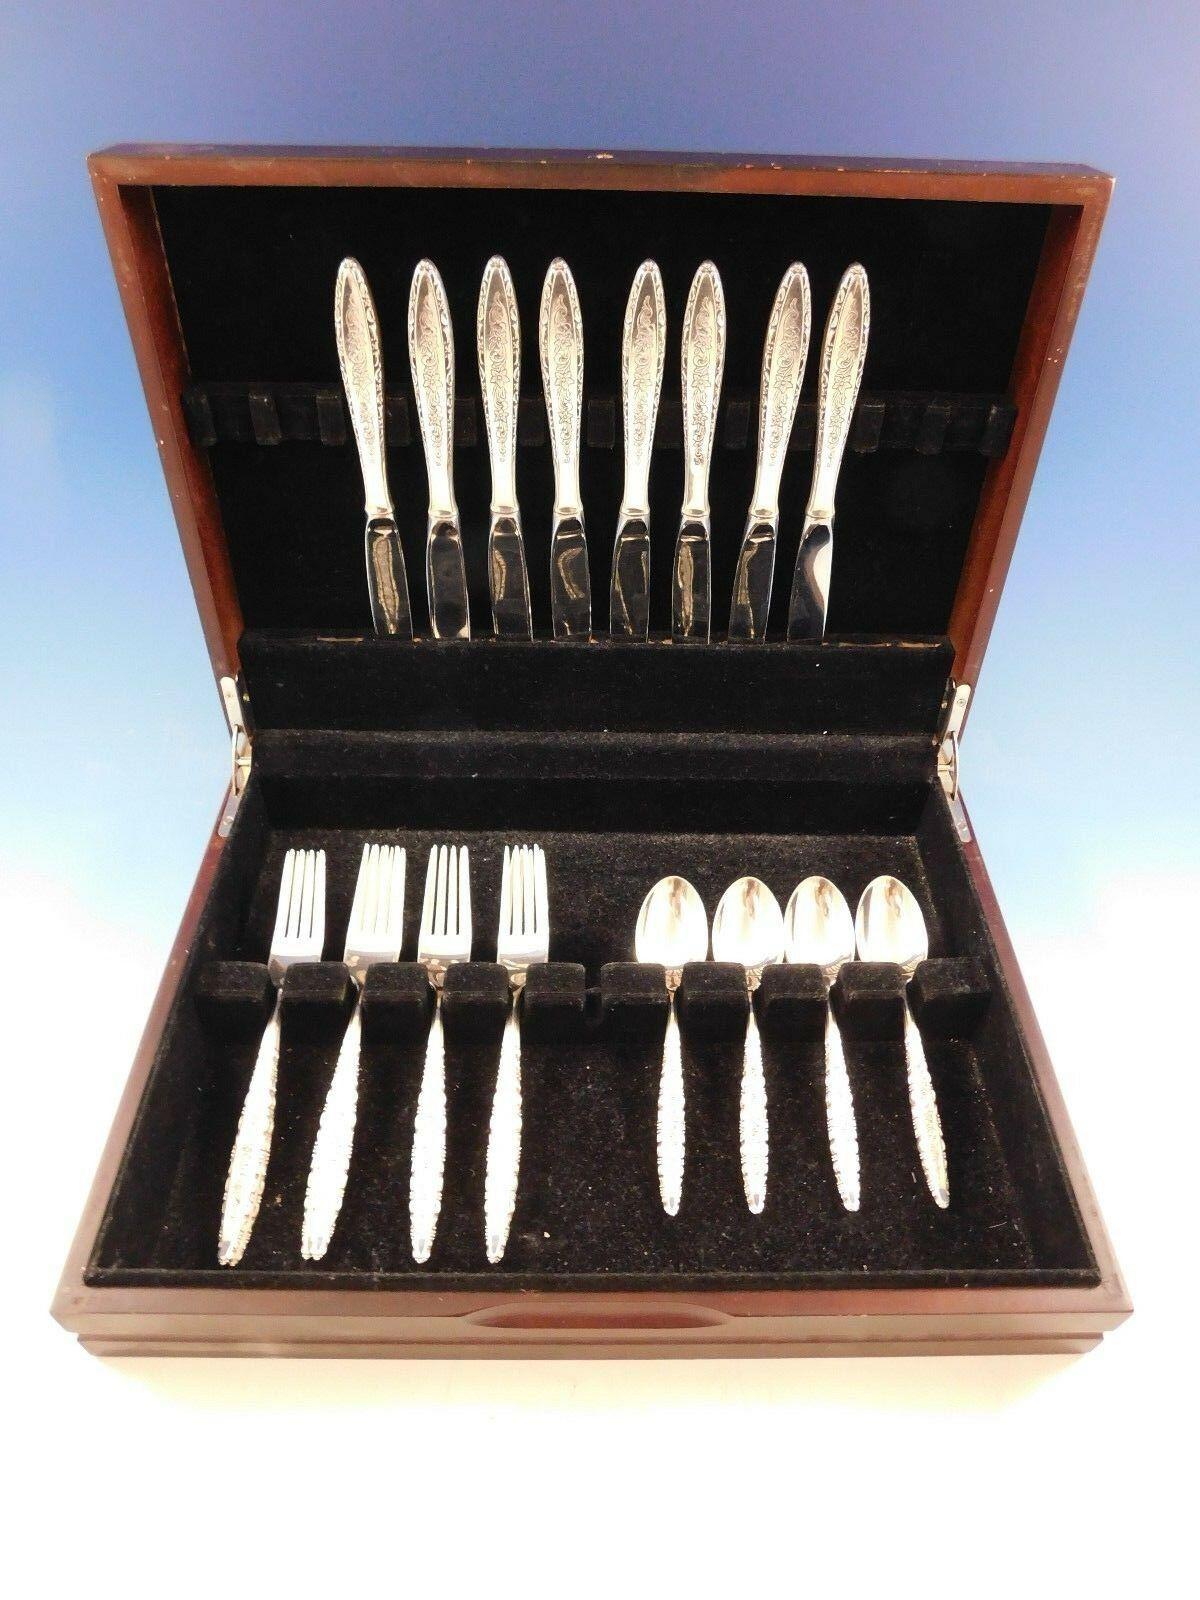 Lovely floral lace by Lunt sterling silver Flatware set, 24 pieces. This set includes:

8 knives, 9